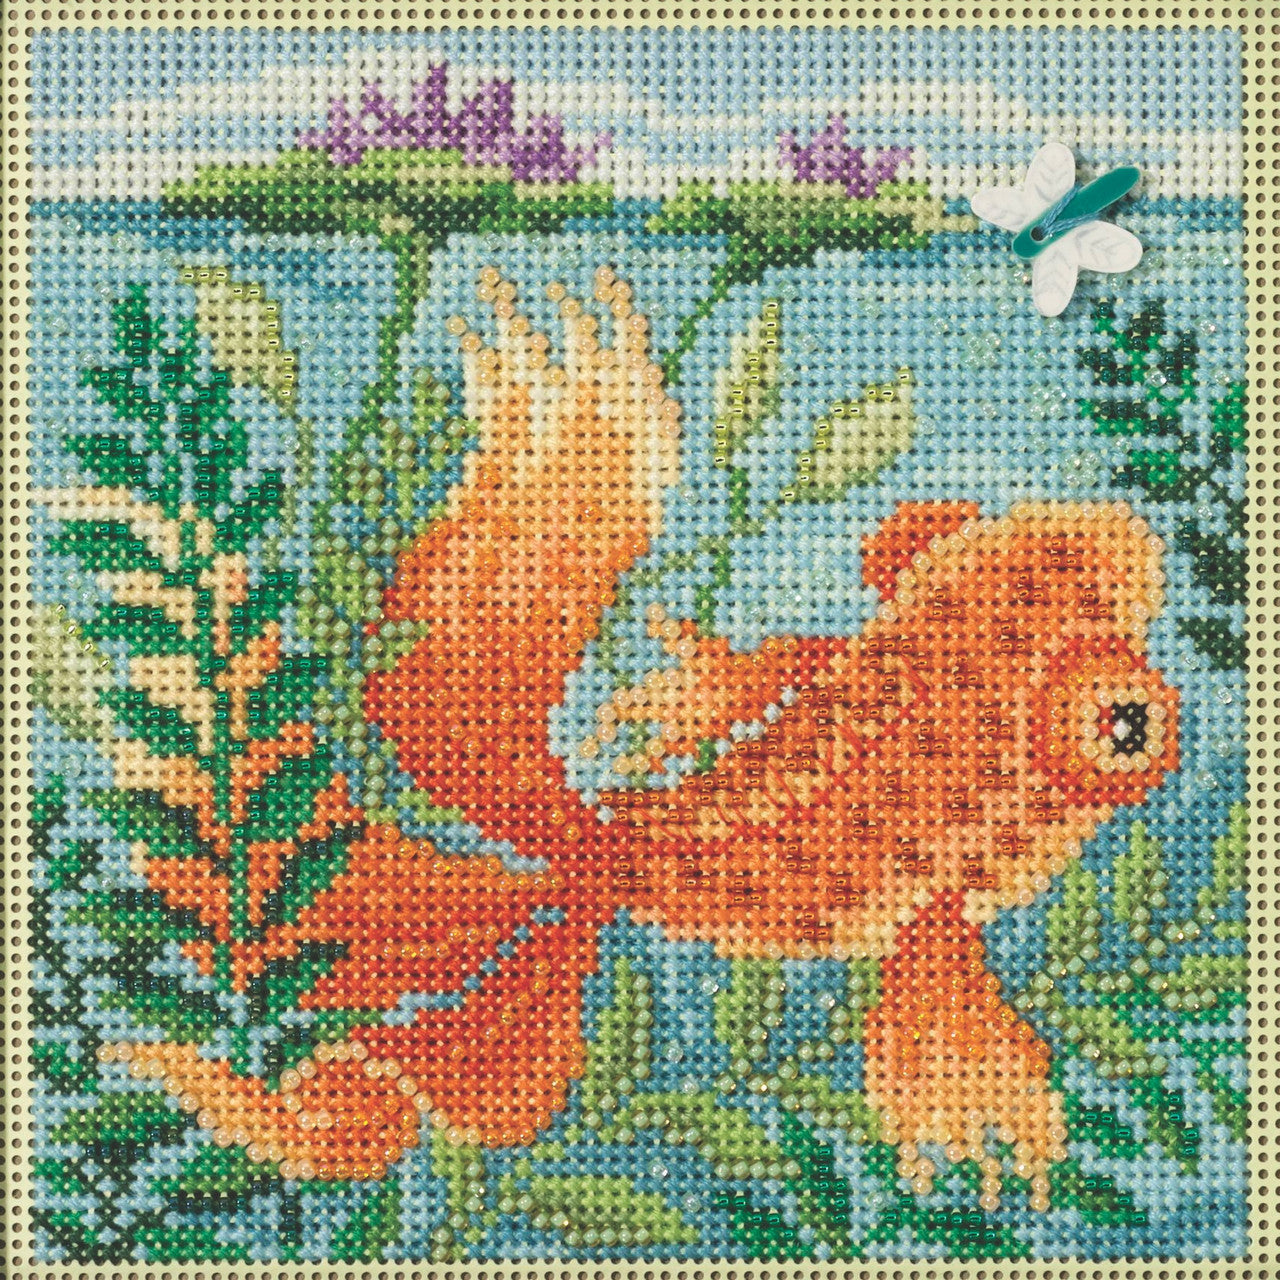 Buttons & Beads - Koi Pond counted cross stitch kit